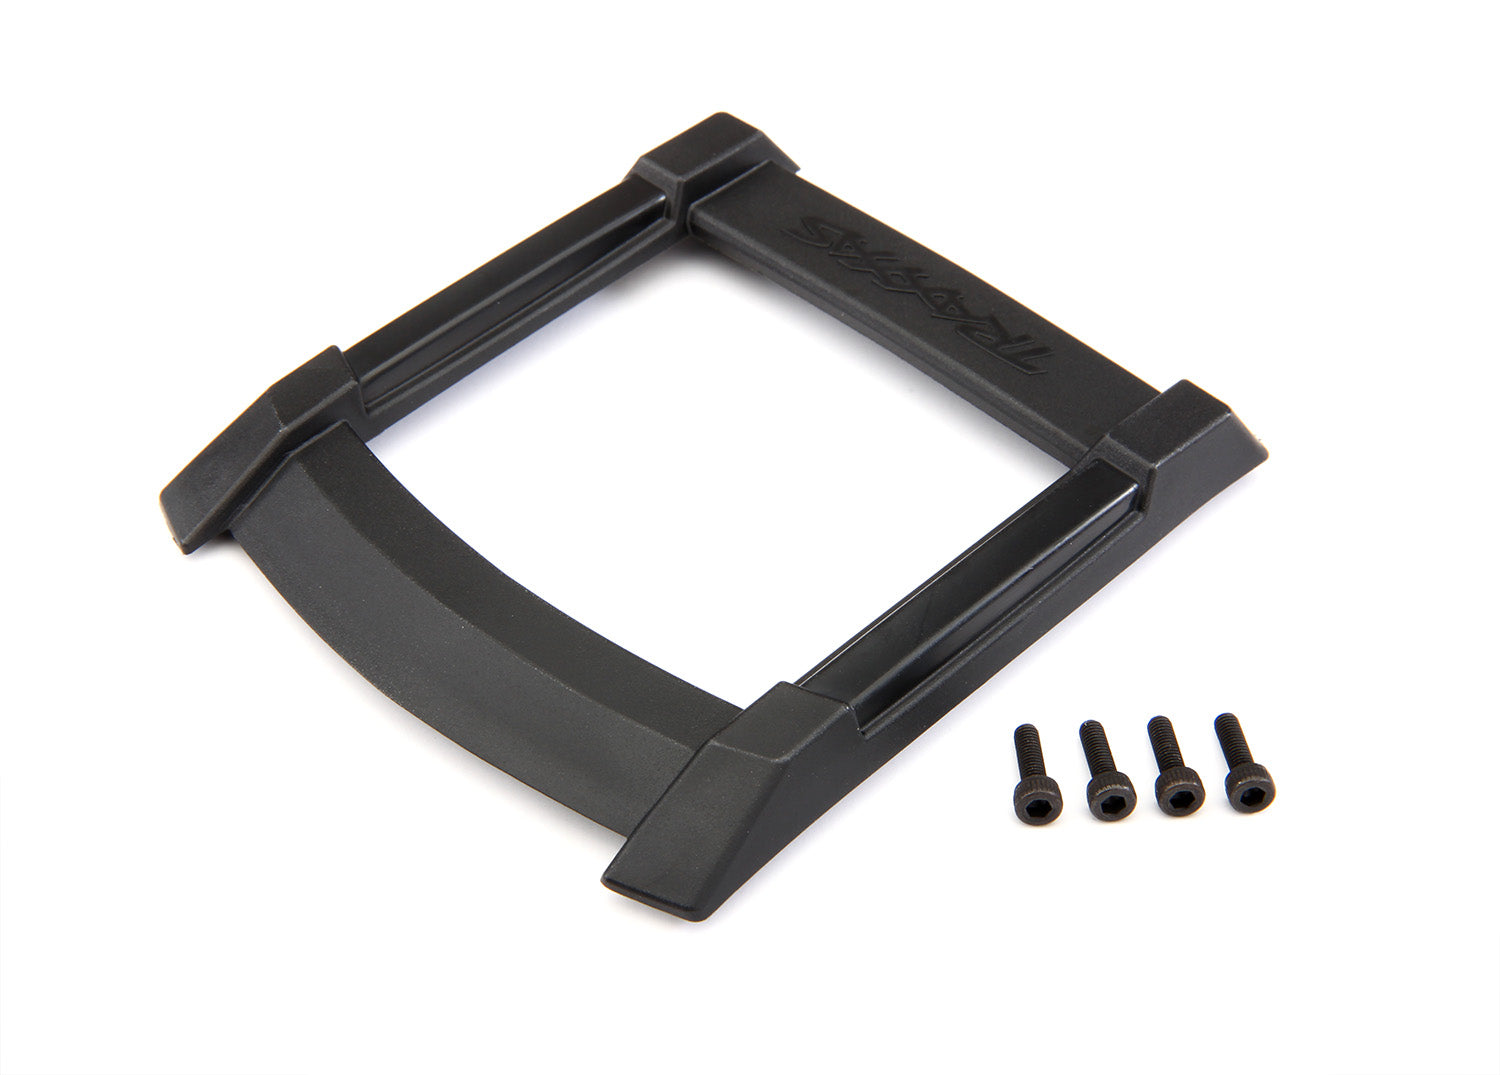 Traxxas Maxx Roof Body Skid Plate (Assorted Colors)